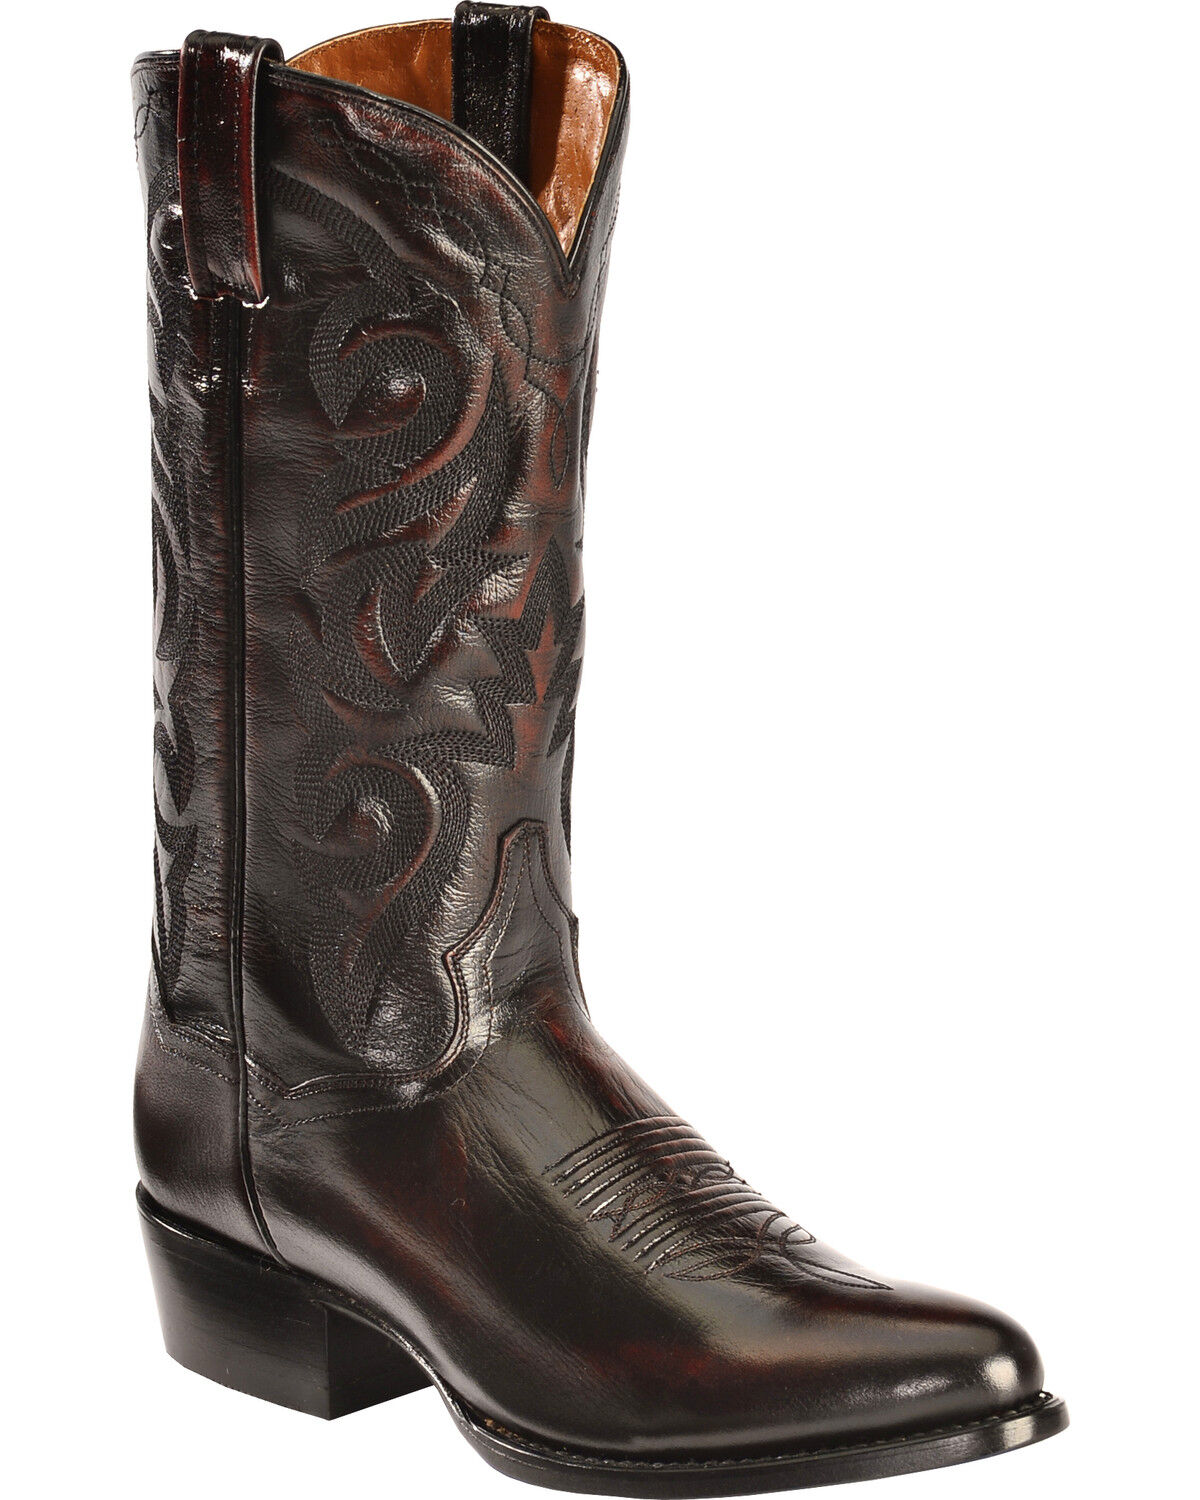 best selling cowboy boots